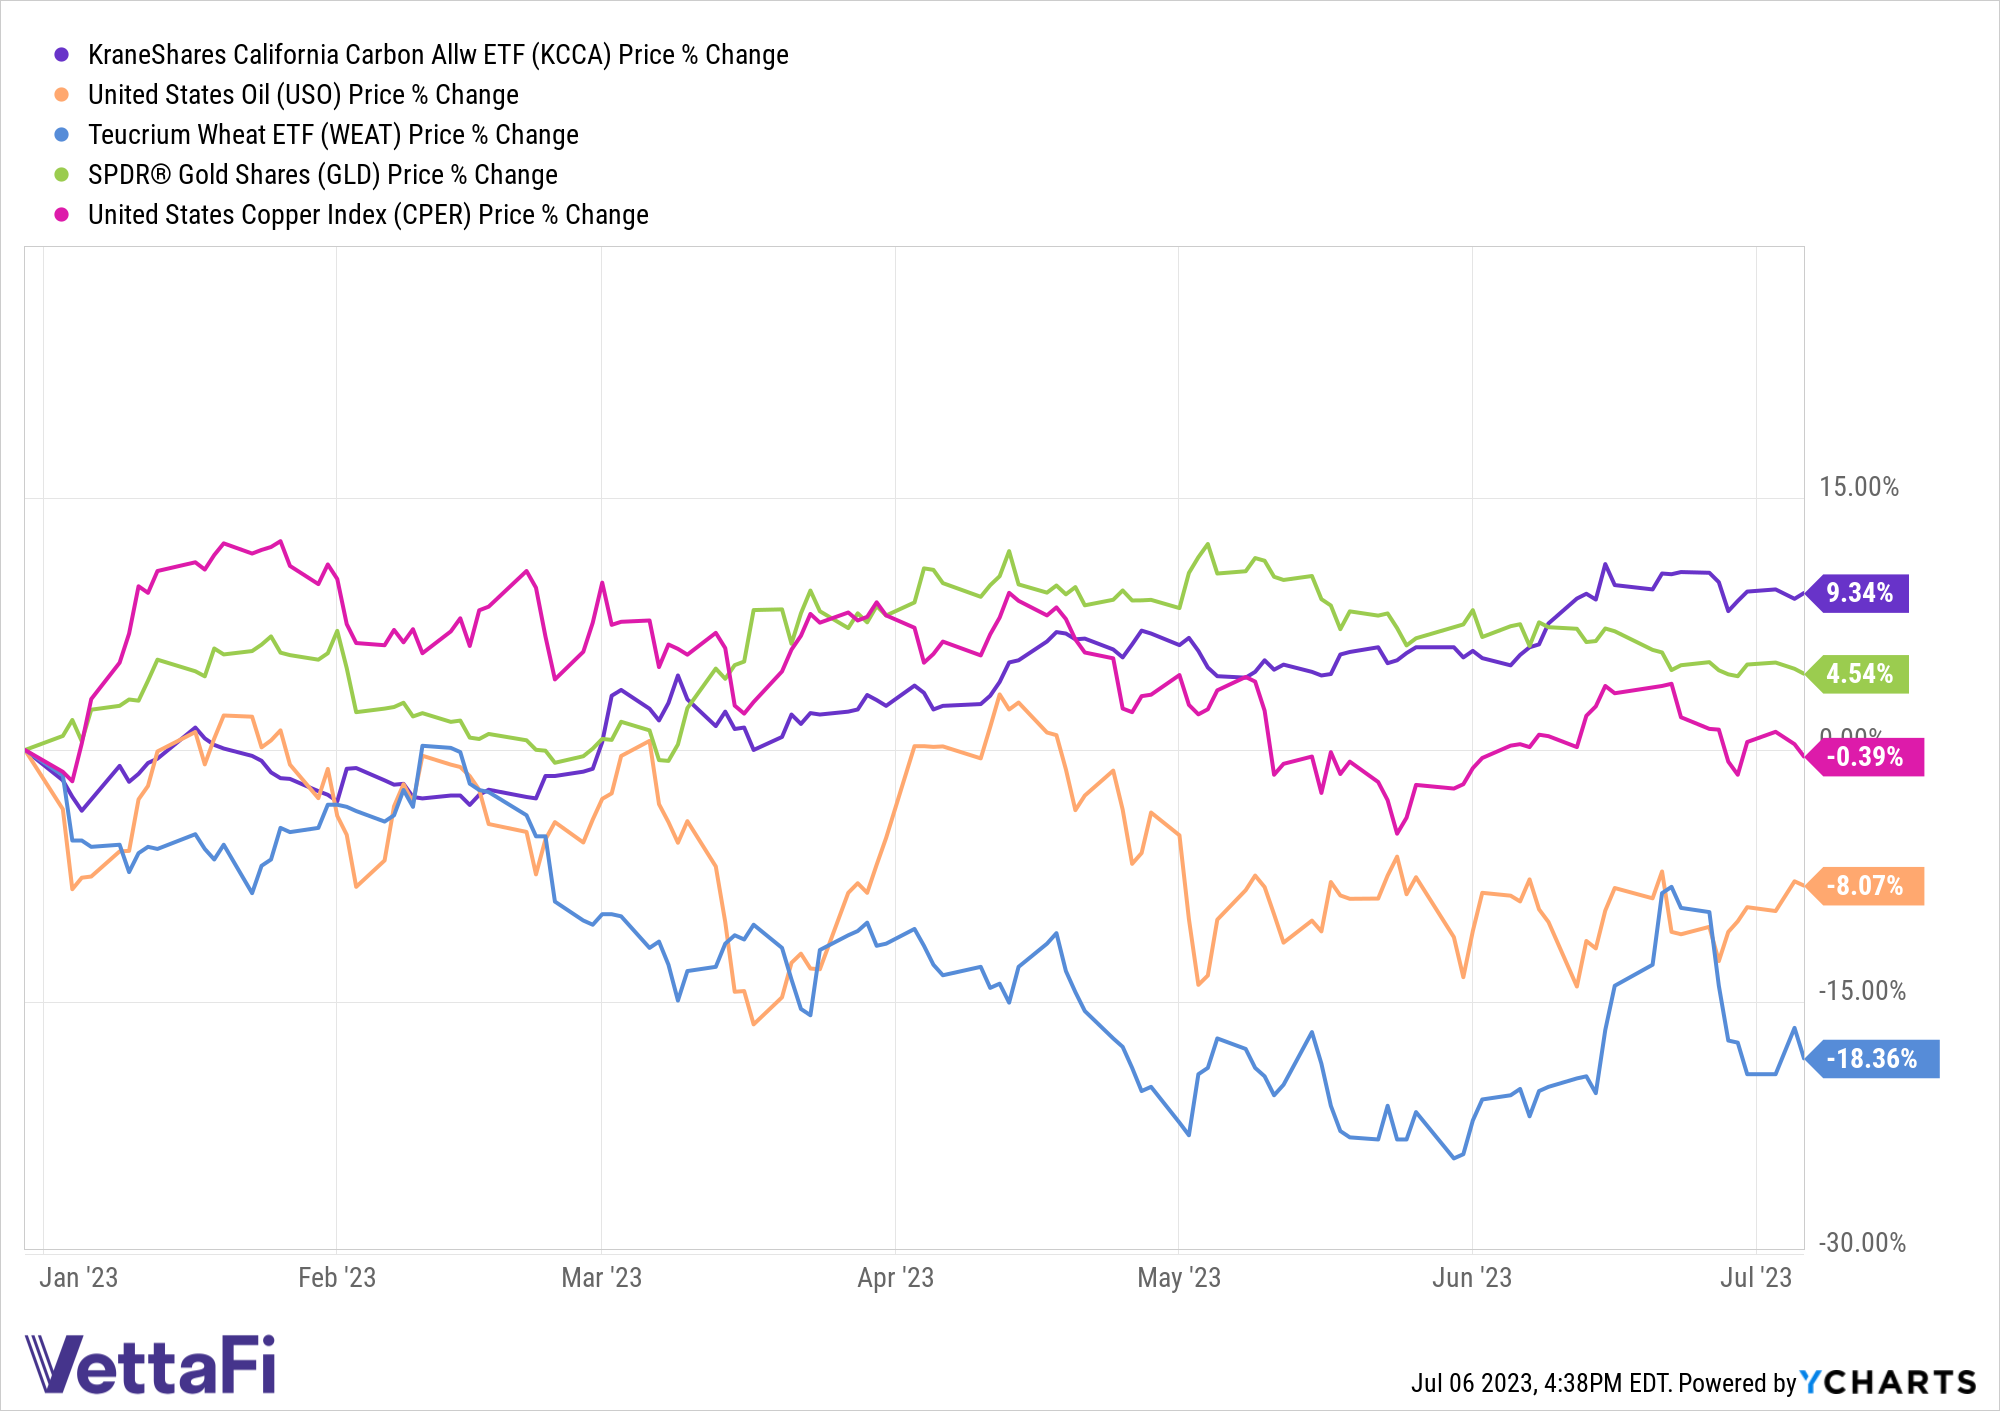 Graph of YTD performance for KCCA (9.34%), GLD (4.54%), CPER (-0.39%), USO (-8.07%), and WEAT (-18.36%). 